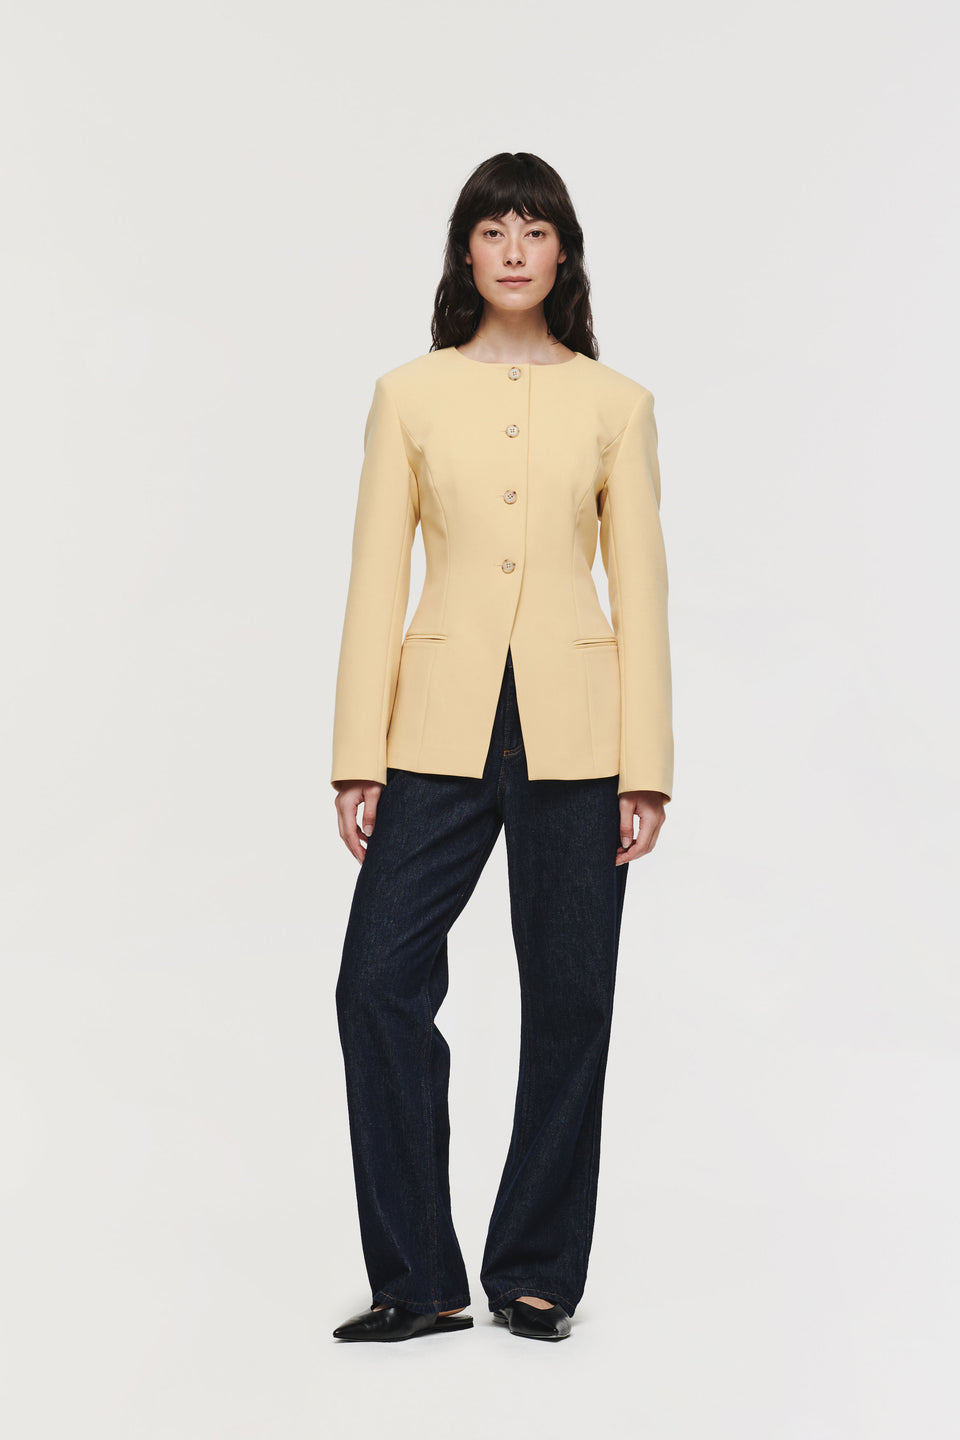 Daphne is the long sleeve version of our popular Leo waistcoat. Finished with a curved neckline, contrast buttons and in a striking soft yellow hue that works well as an eye-catching statement. Pair with the matching KIMMI trousers for a co-ordinated outfit or a wear with straight leg jeans for a look that feels more casual.